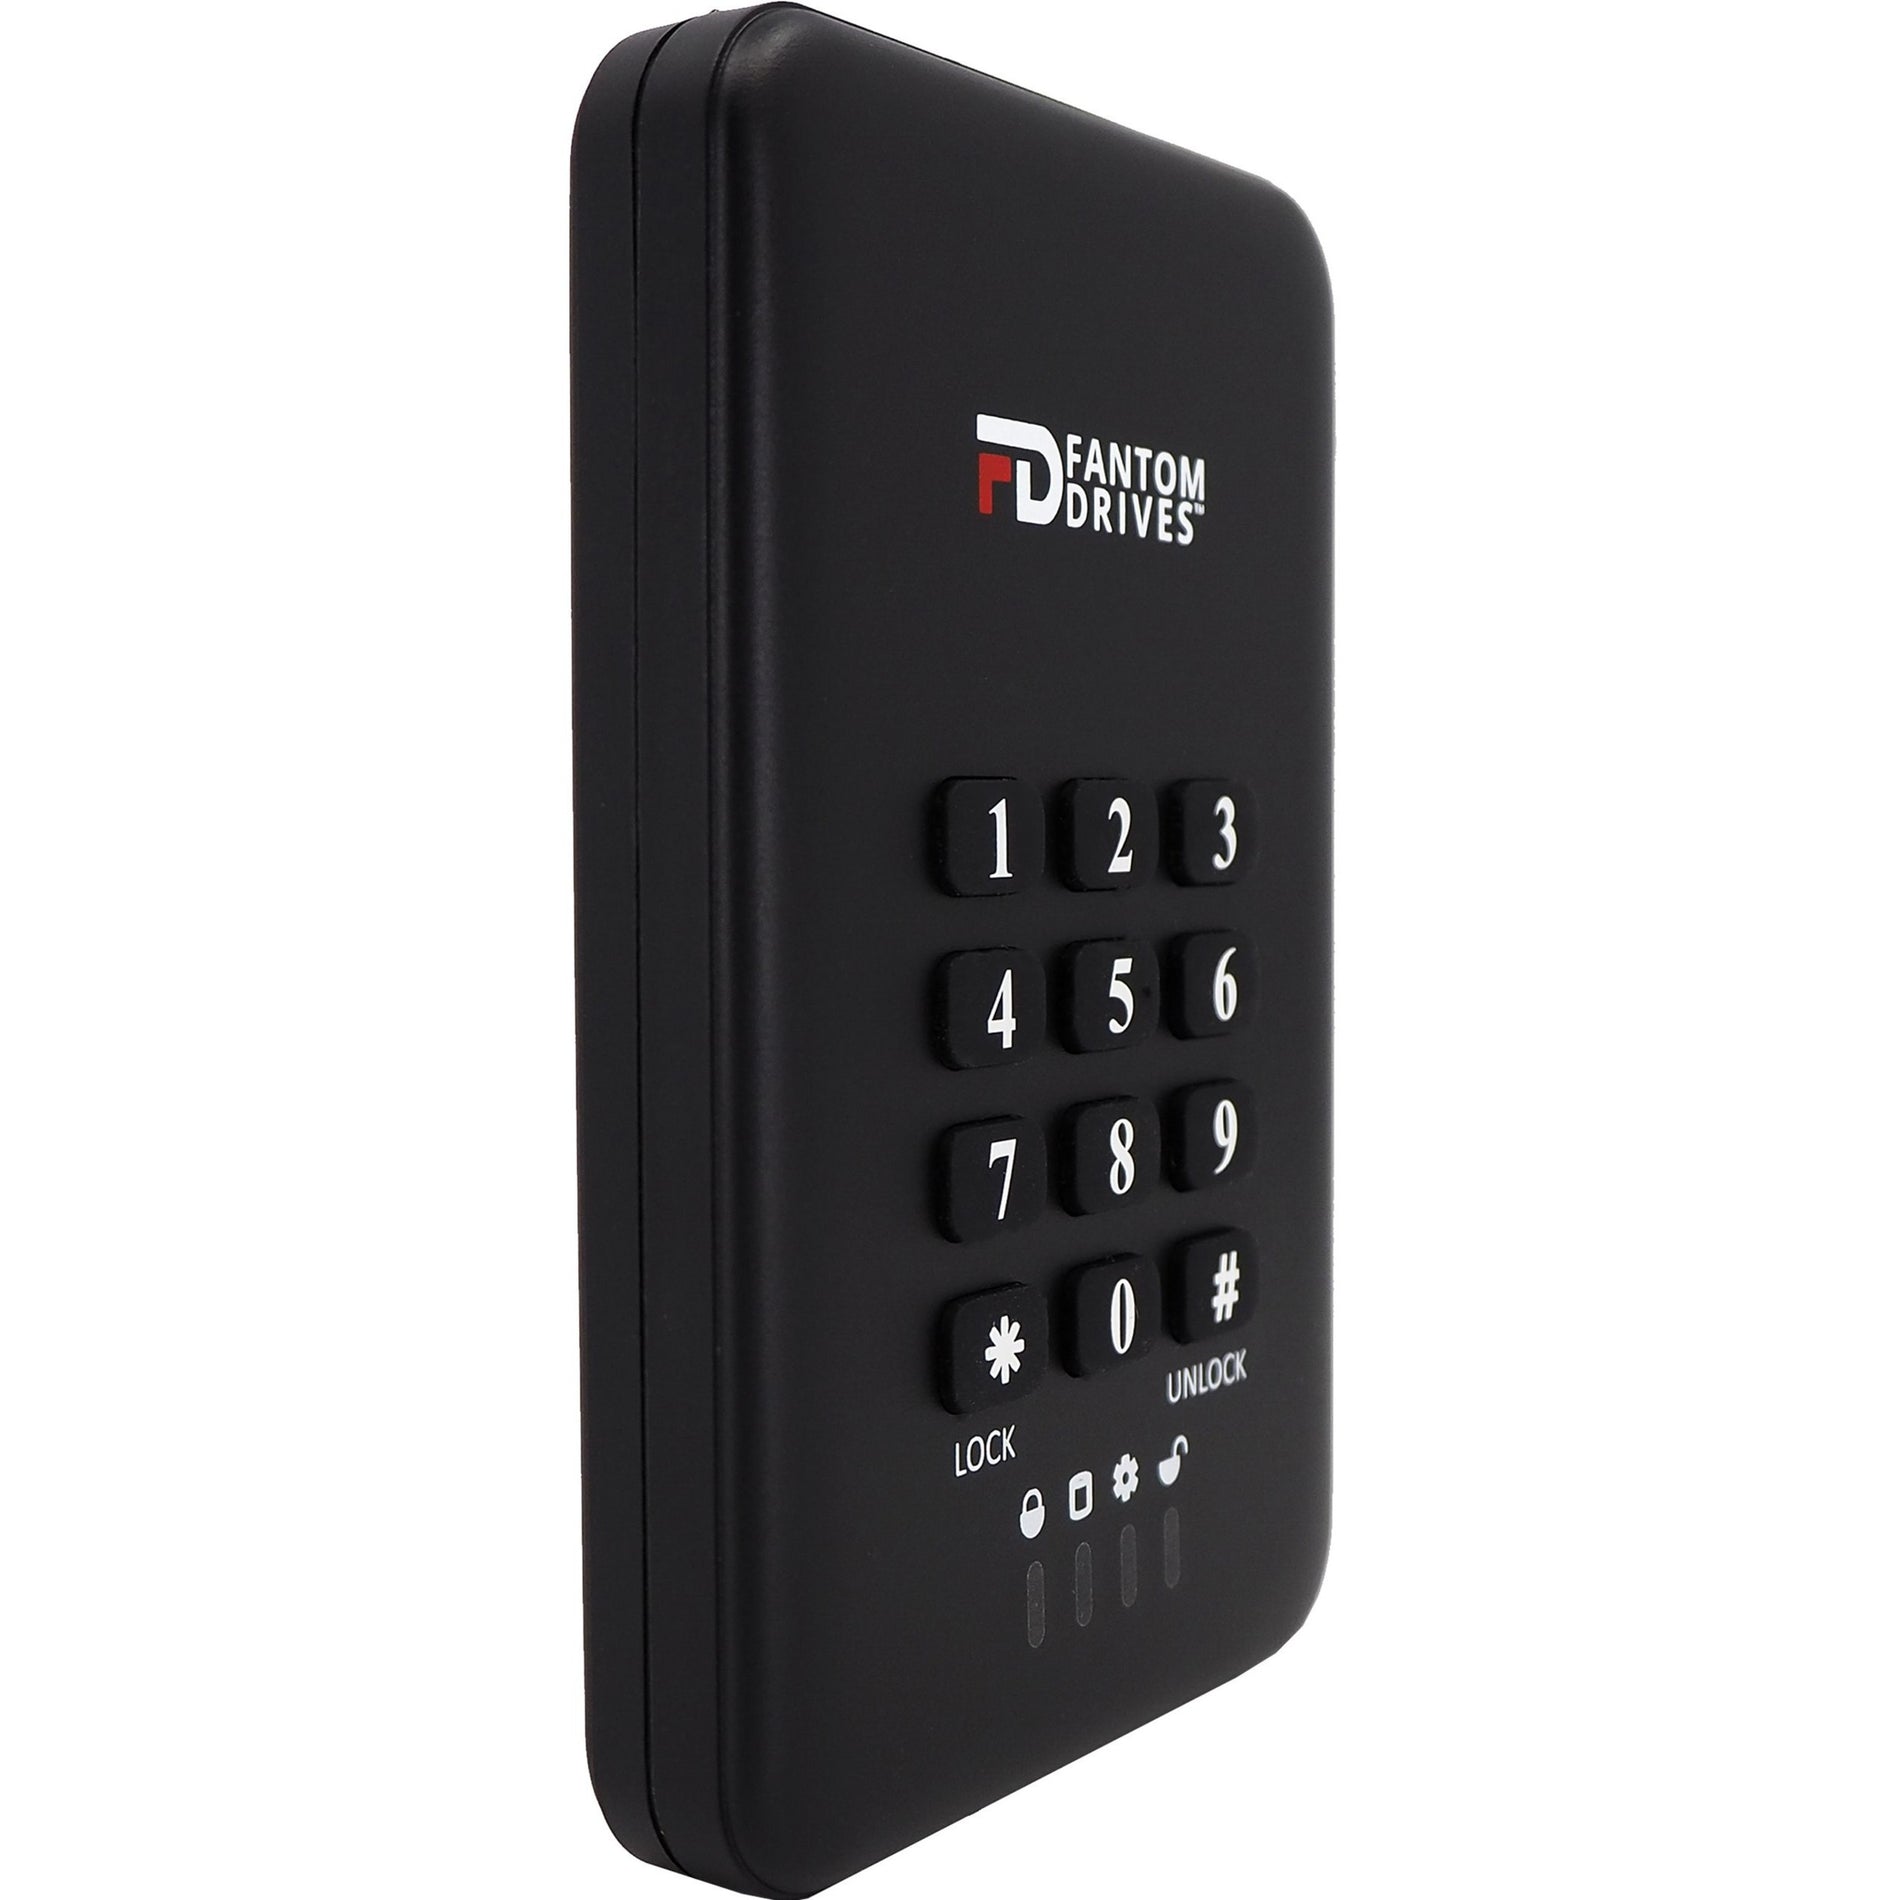 Fantom Drives DSS2000 Datashield 2TB Encrypted SSD, 256-Bit AES Hardware Encryption, Portable Solid State Drive